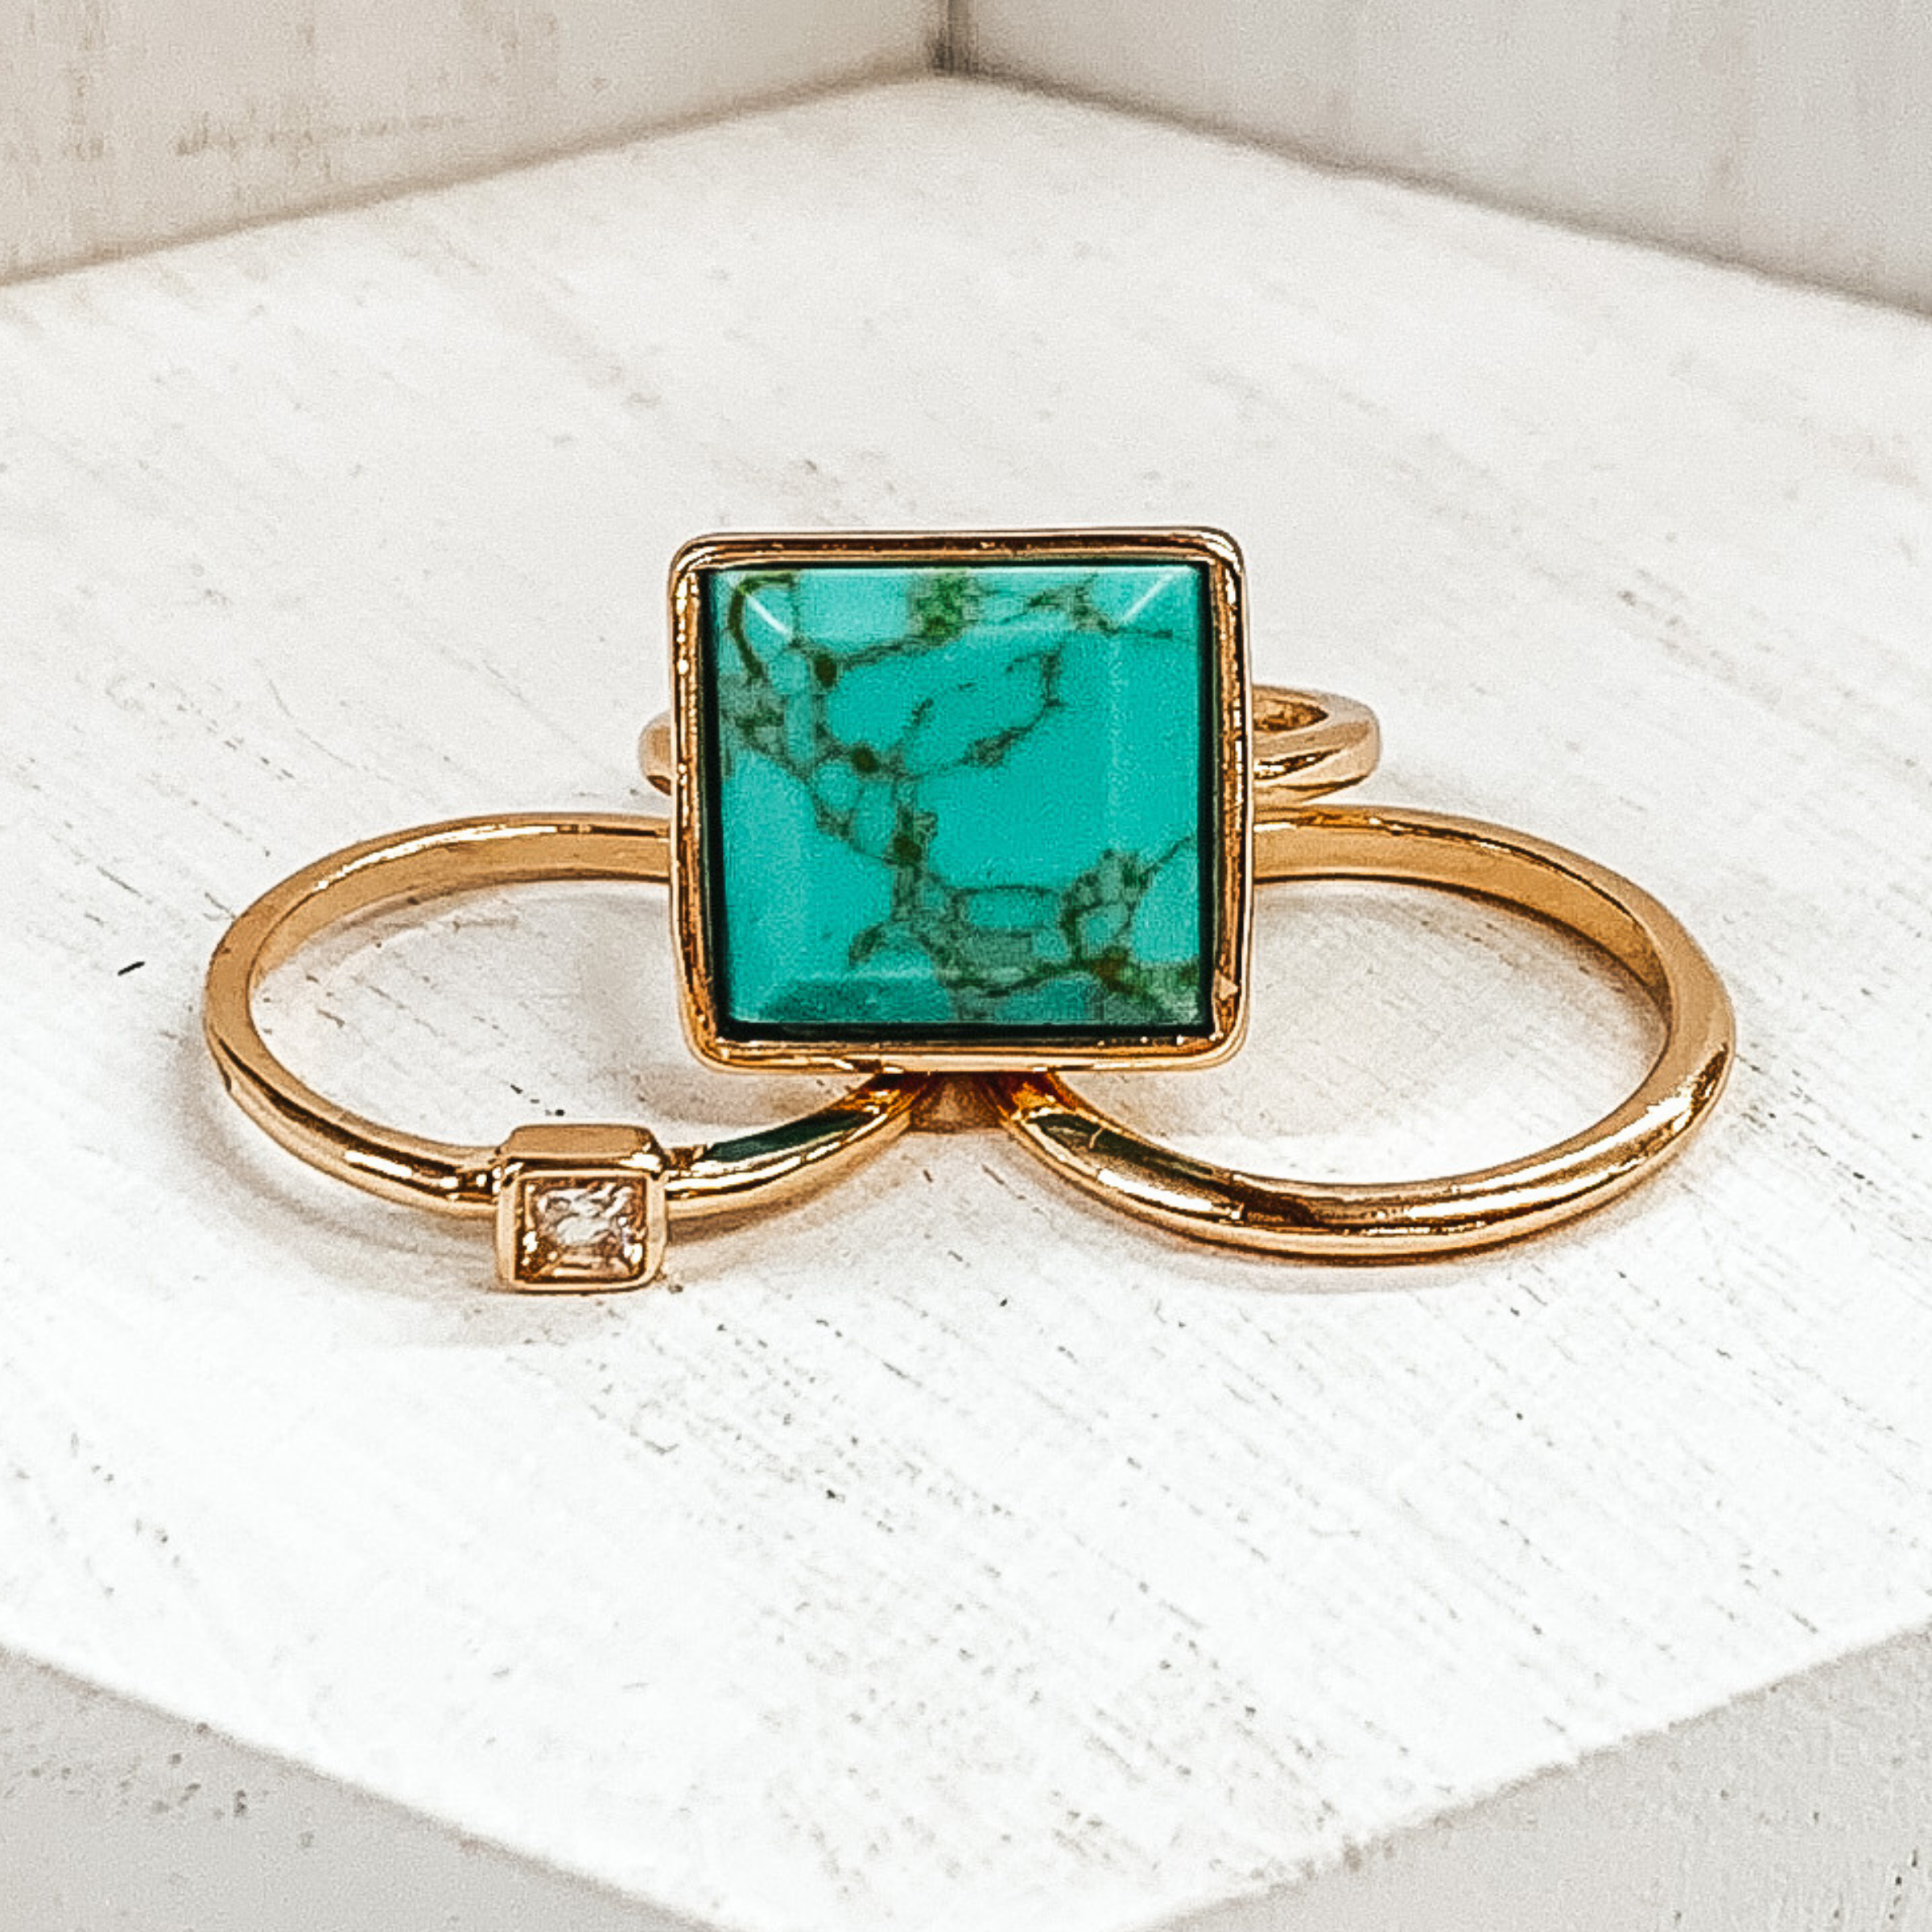 Set of three gold rings. One ring is a plain gold band. Another has a small square pendant with a center crystal. The third ring has a big, turquoise pendant. These rings are pictured on a white background.  